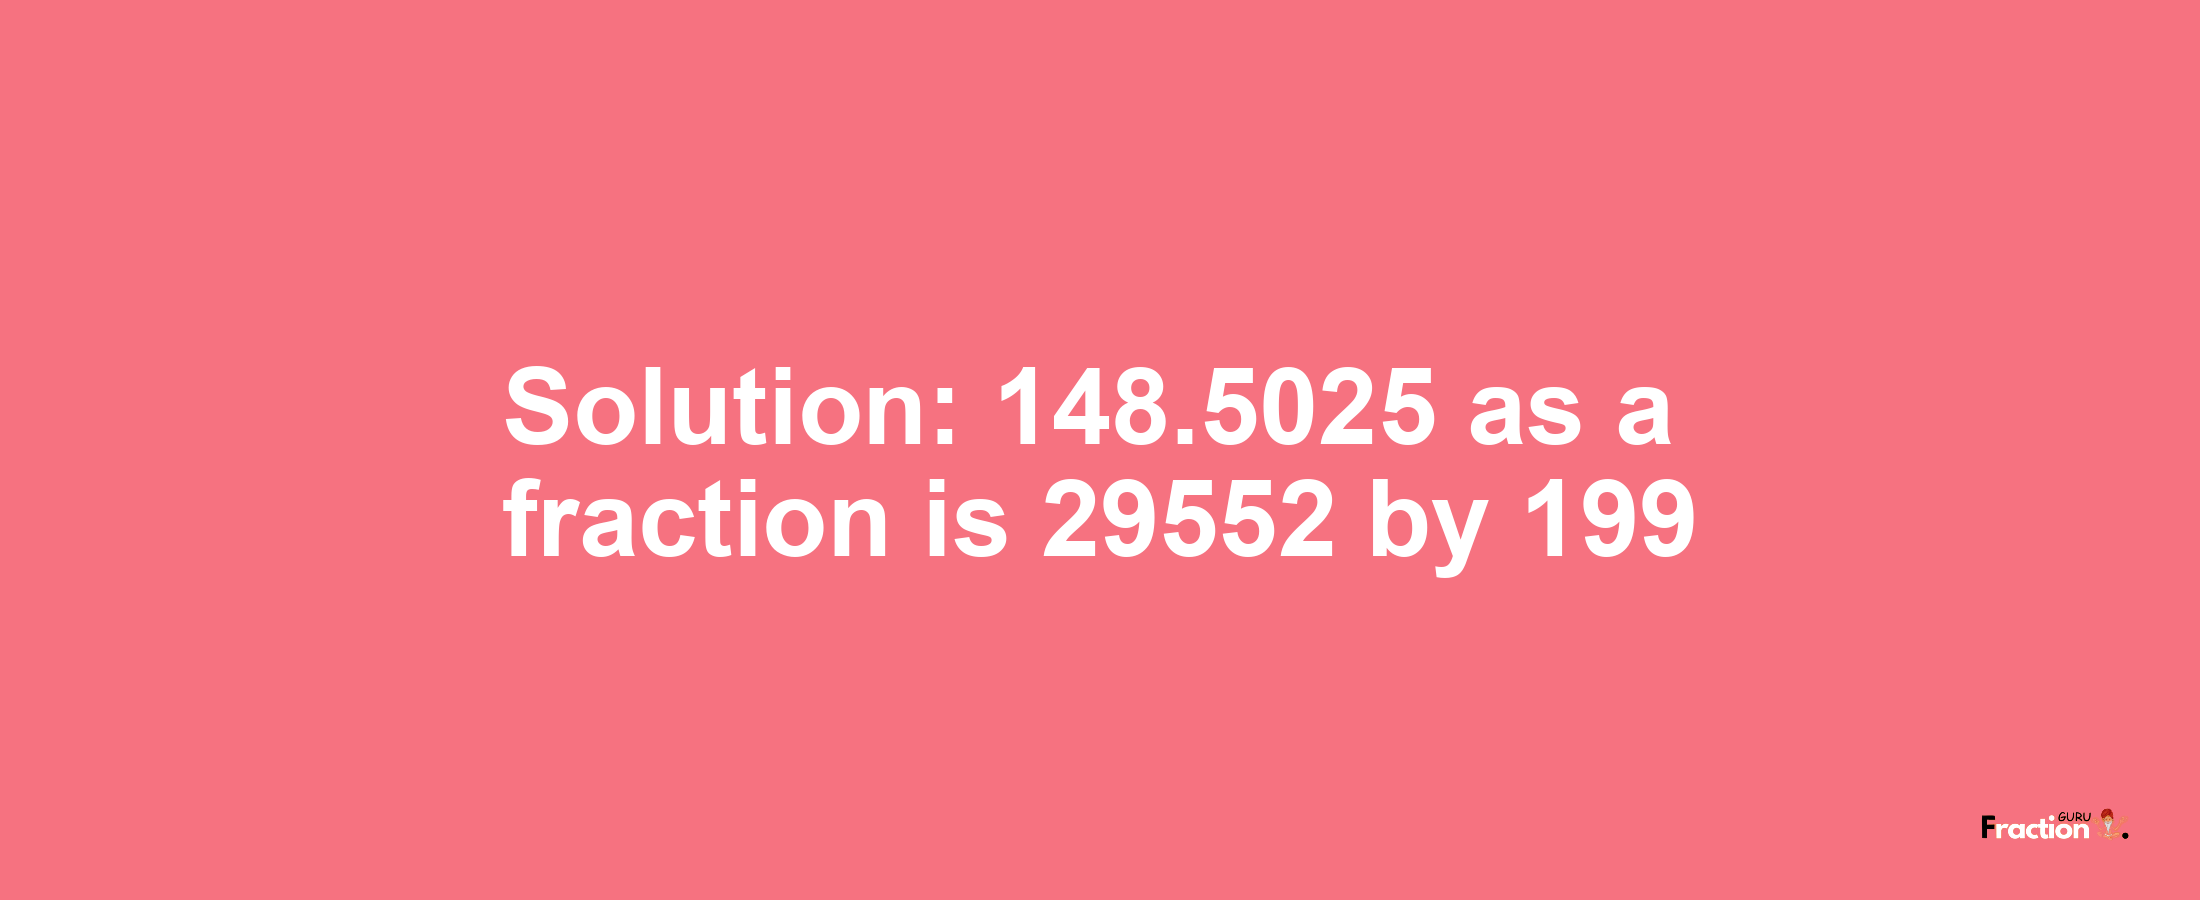 Solution:148.5025 as a fraction is 29552/199